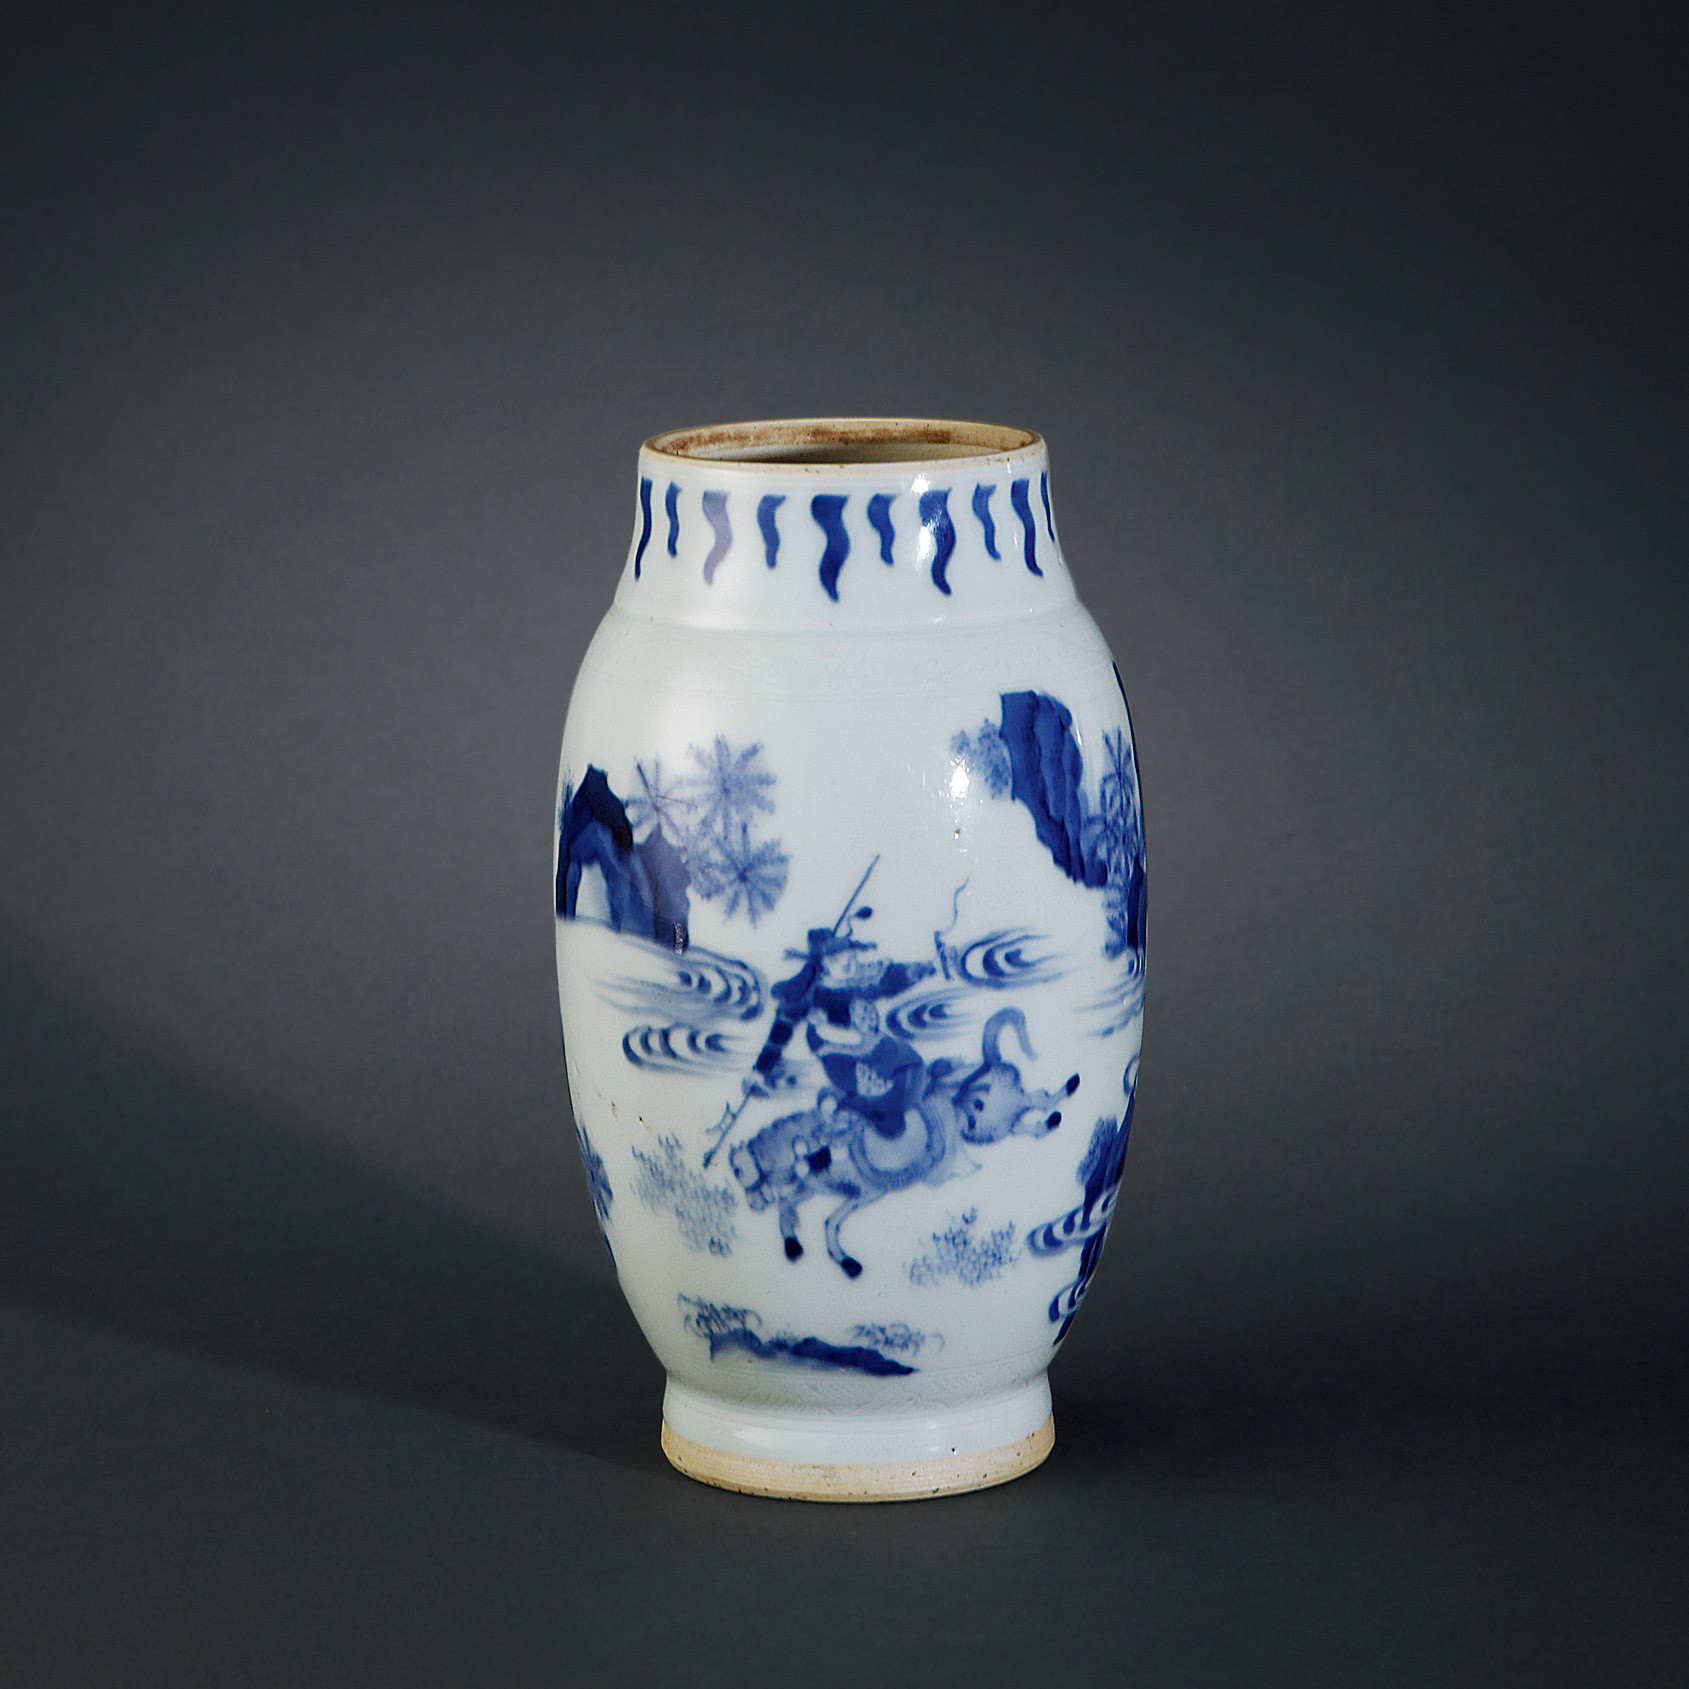 A BLUE AND WHITE‘LOTUS SEED’POT